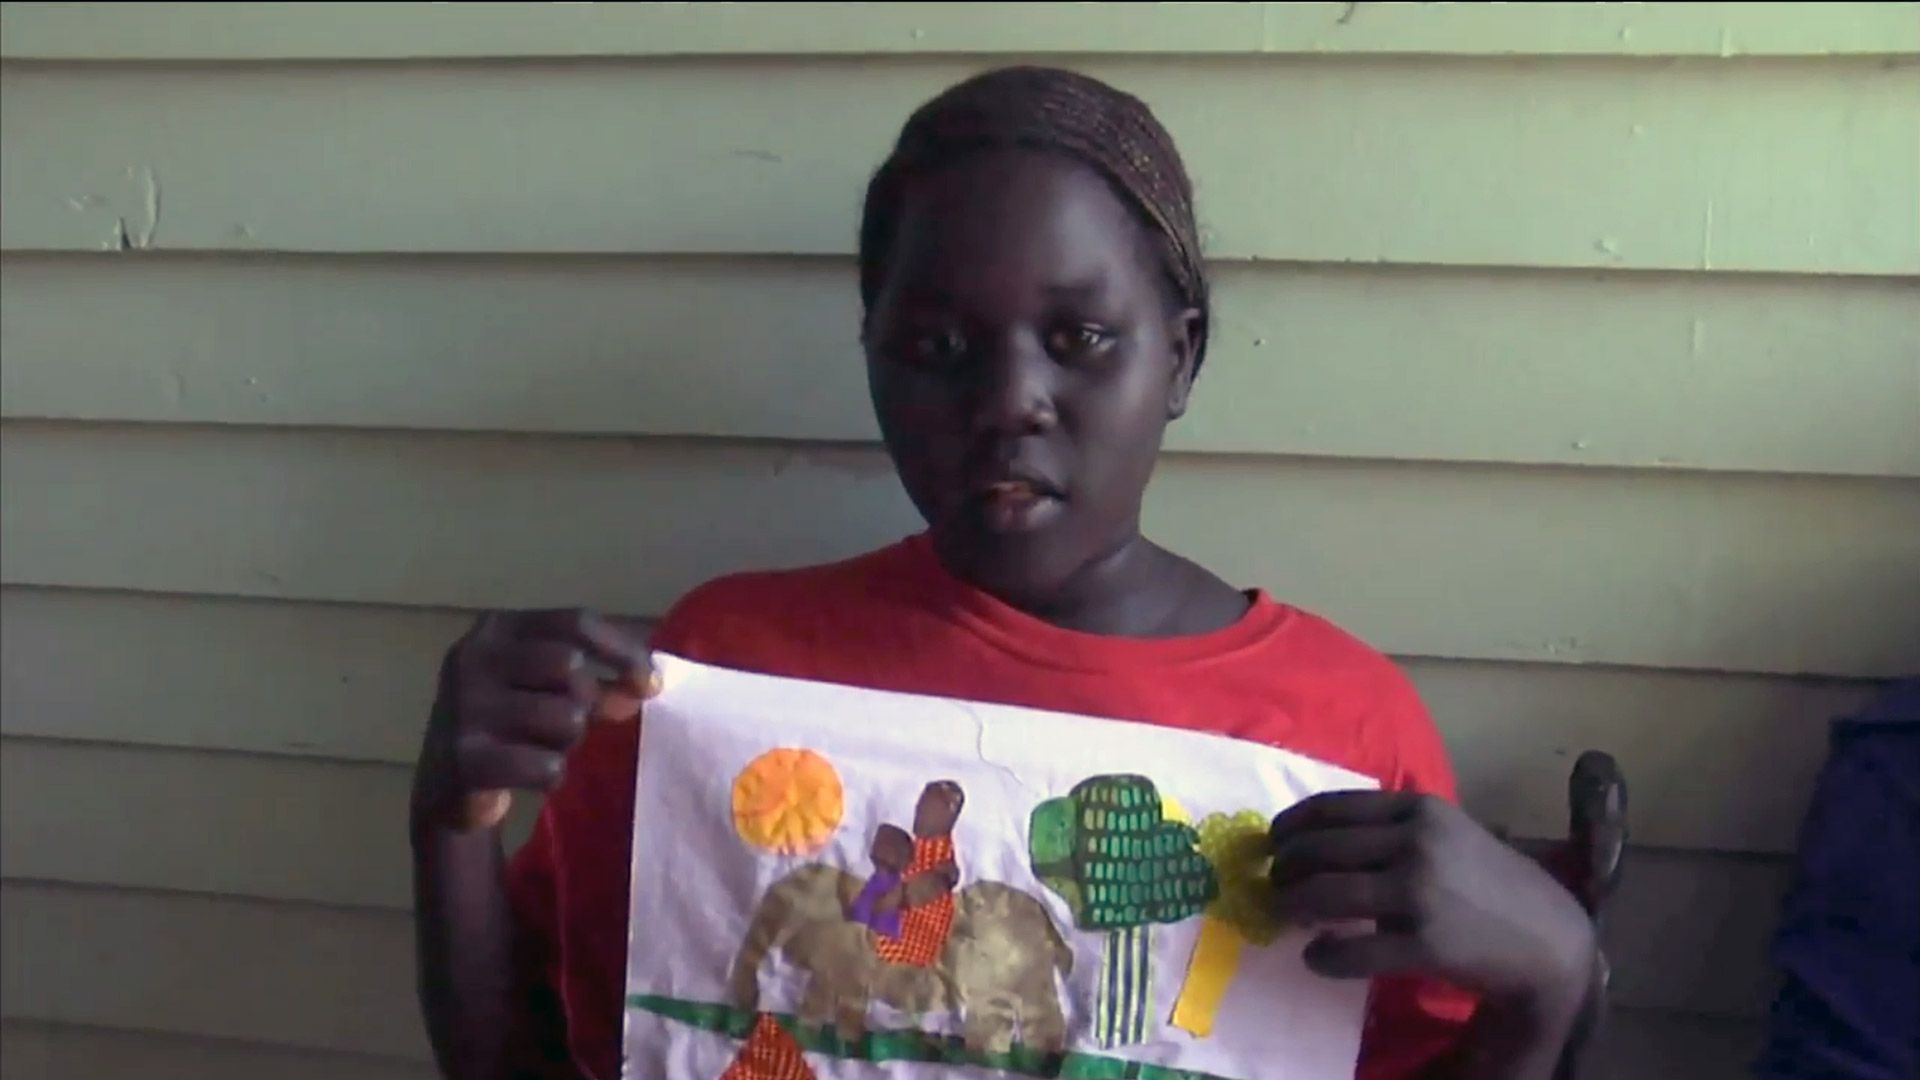 Nyakuot shows off her Memories block at the Stuhr Museum. From the documentary The Quilted Conscience